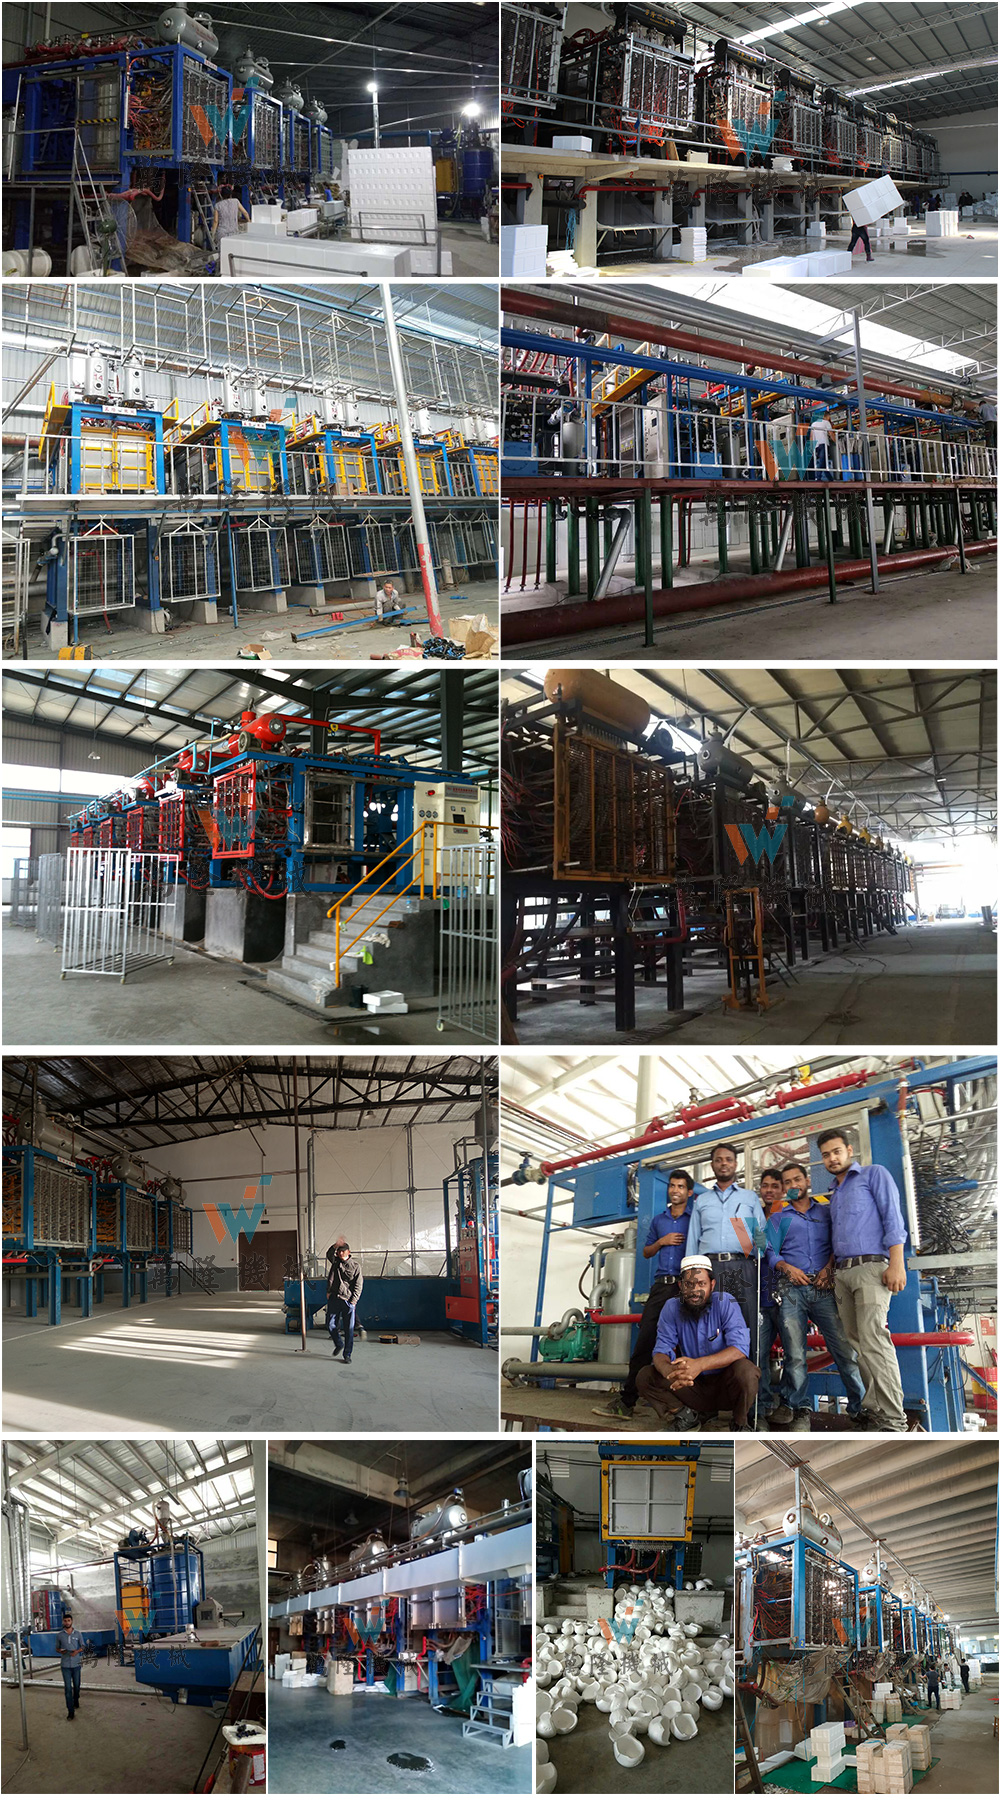 Low consumption EPS polystyrene moulding machine | EPS moulding machine | EPS machine